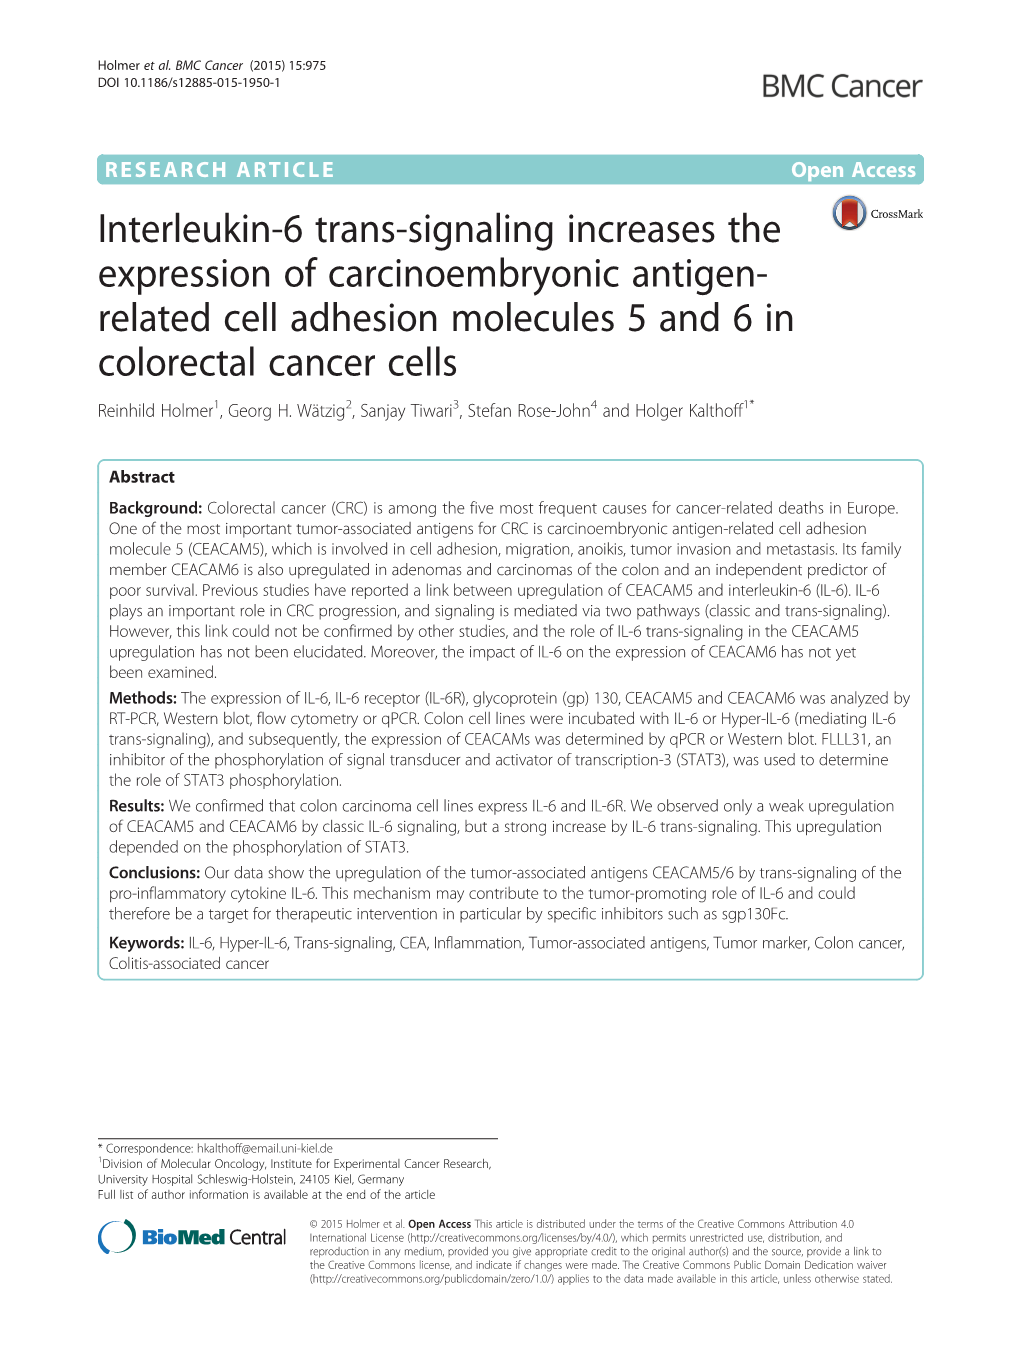 Interleukin-6 Trans-Signaling Increases the Expression Of